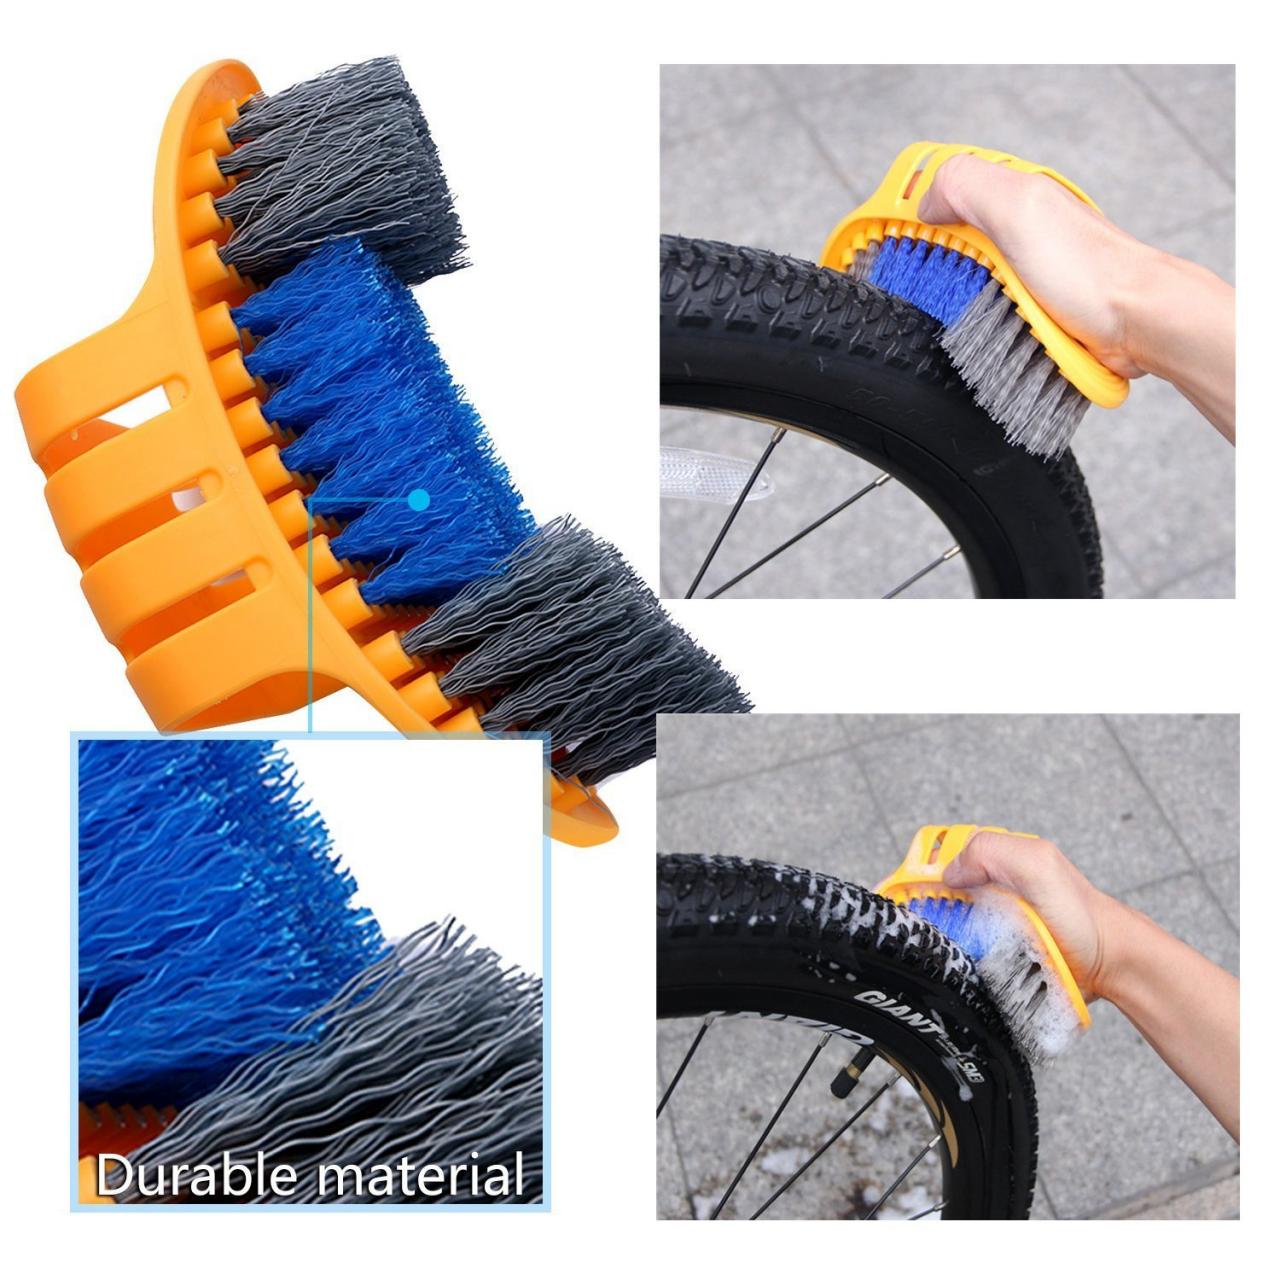 Oumers Bicycle Clean Brush Kit, 10pcs Motorcycle Bike Chain Cleaning Tools  Make Chain/Crank/Tire/Sprocket Cycling Corner Stain Dirt Clean,  Durable/Practical fit All Bike : Amazon.in: Car & Motorbike